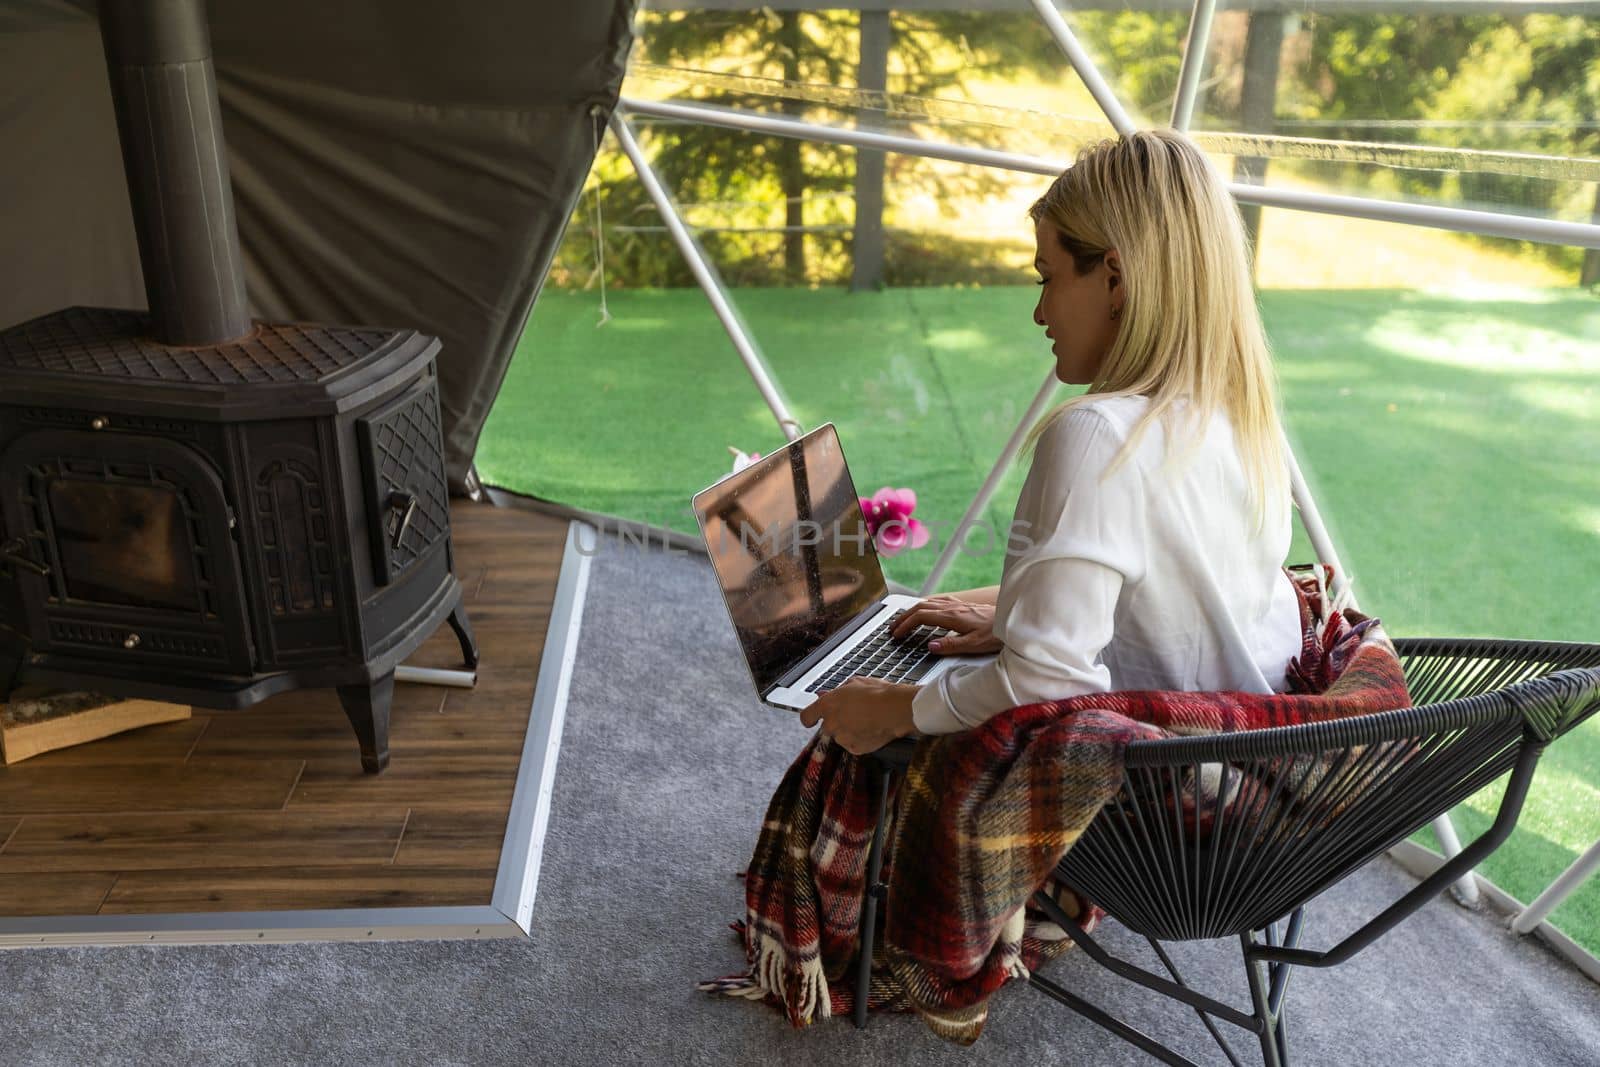 Transparent bubble tent at glamping, Lush forest around and interior. Woman with laptop by Andelov13